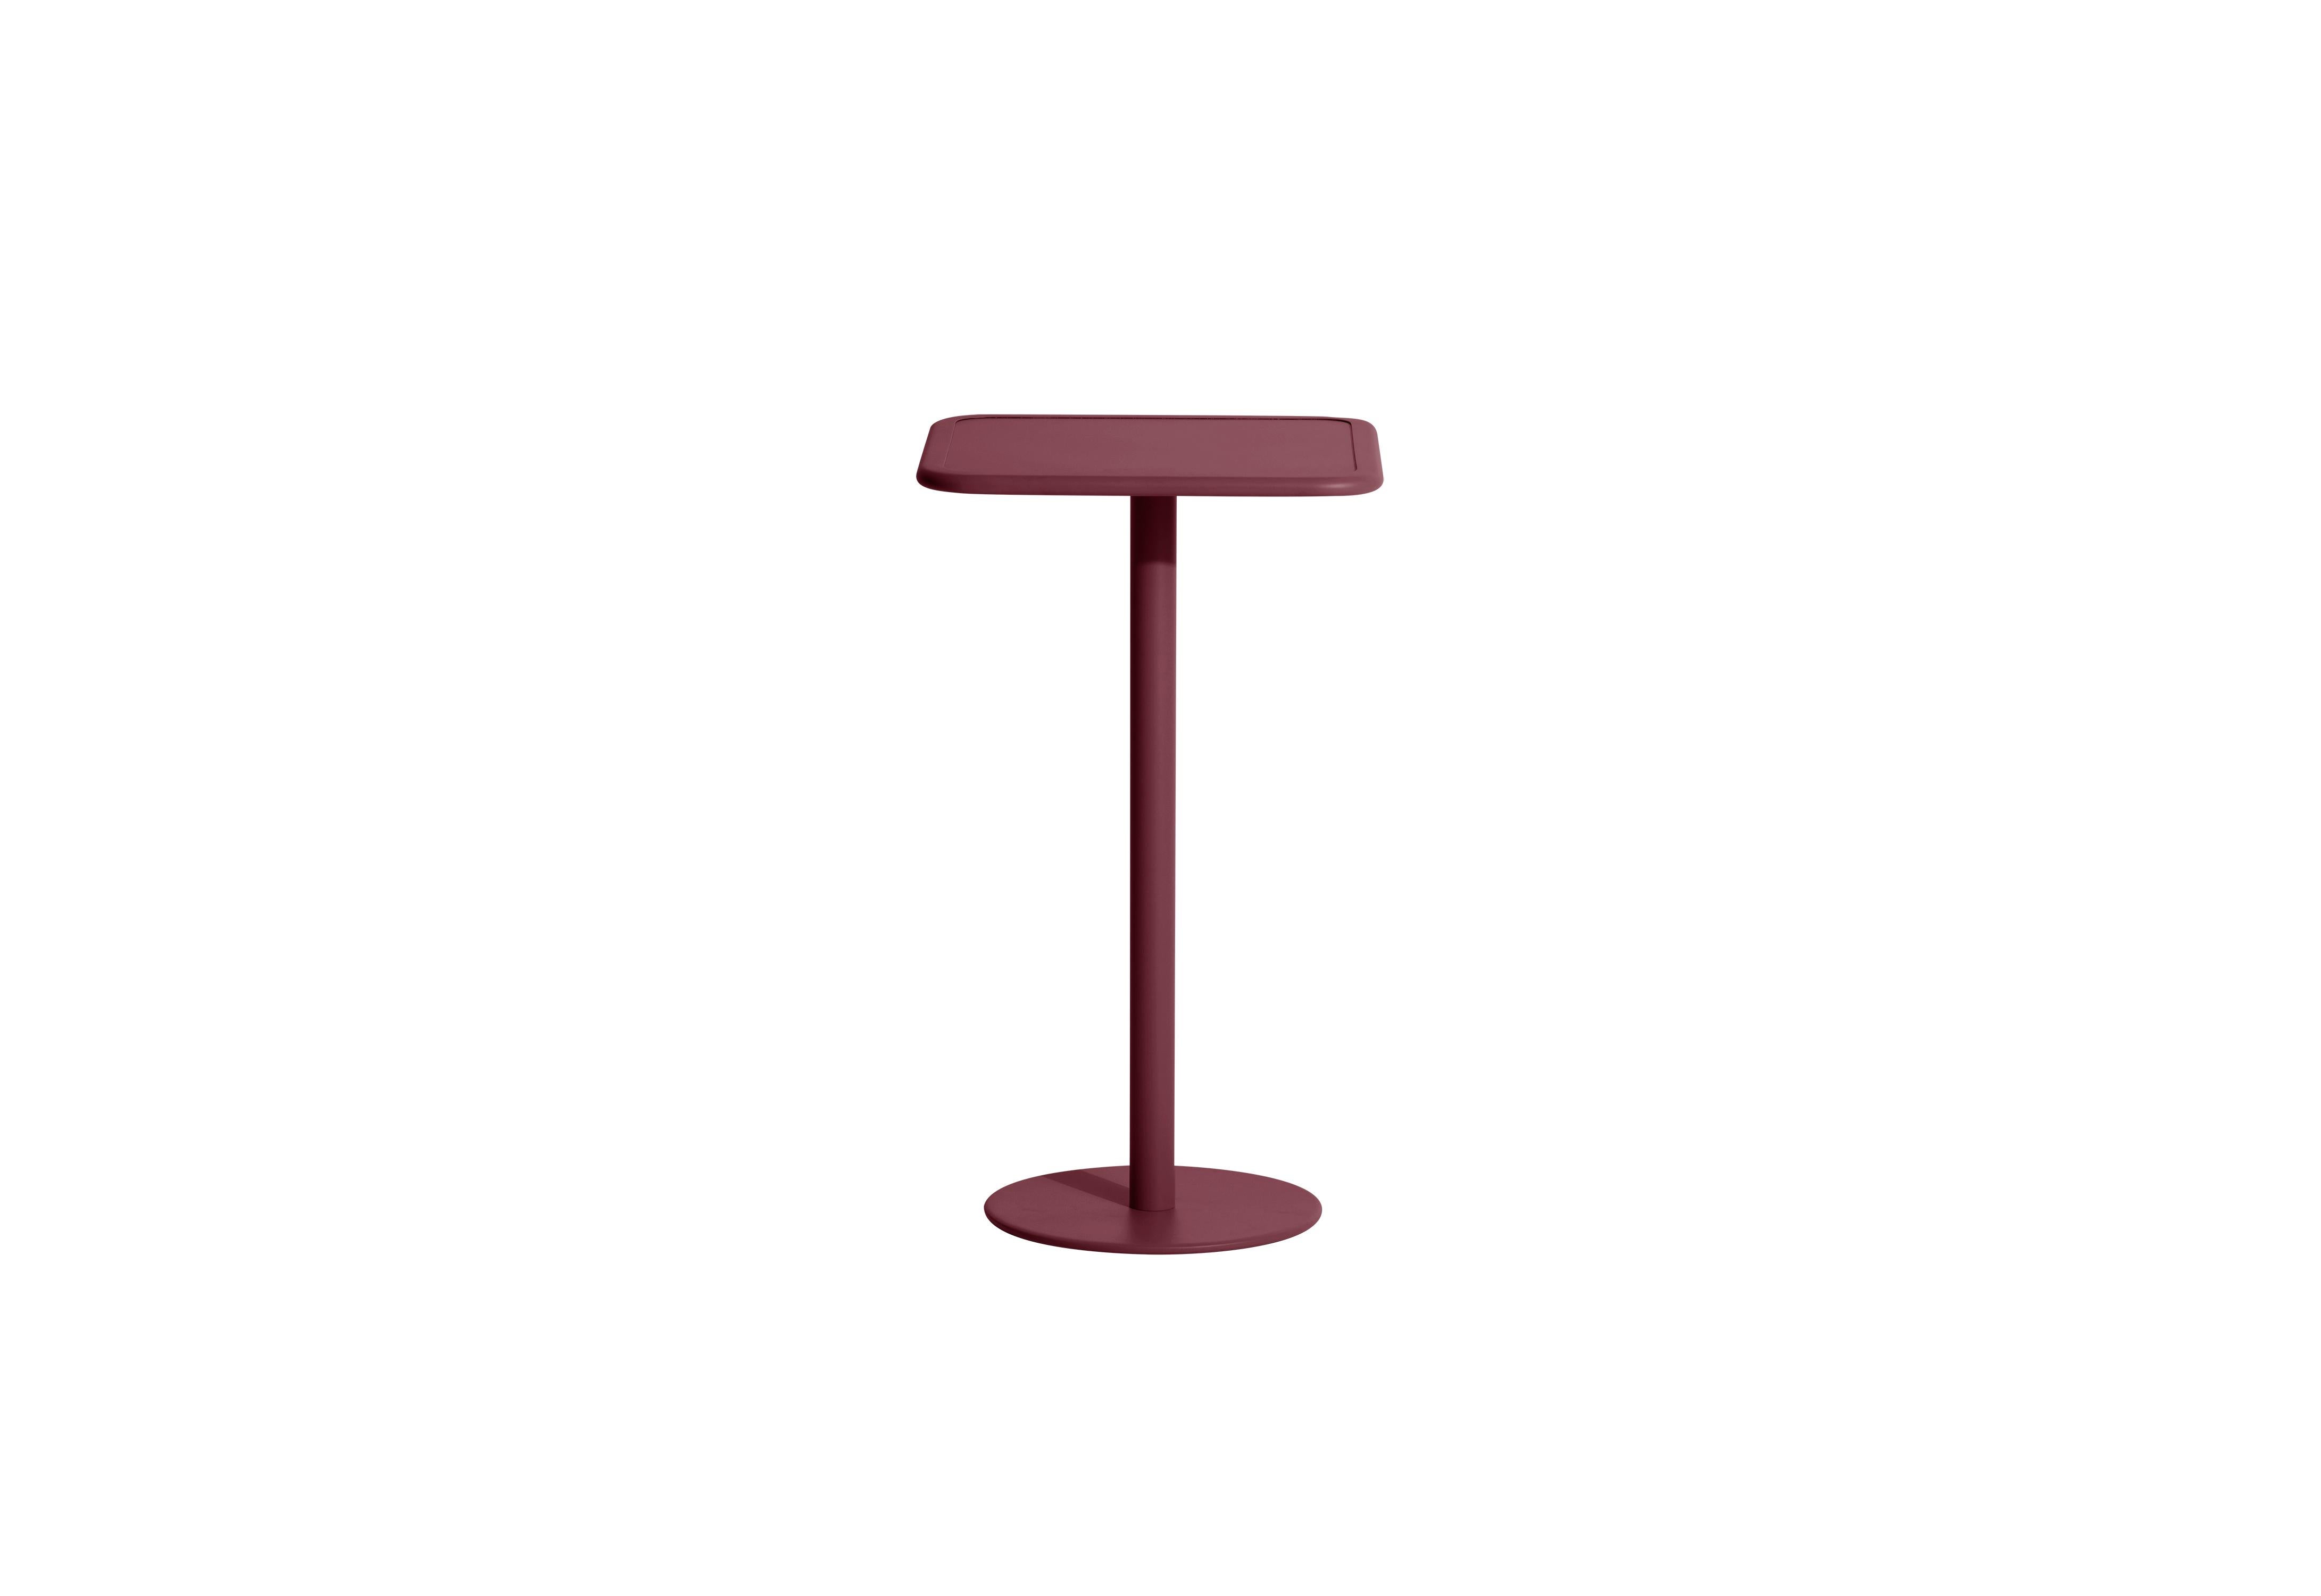 Petite Friture Week-End Square High Table in Burgundy Aluminium by Studio BrichetZiegler, 2017

The week-end collection is a full range of outdoor furniture, in aluminium grained epoxy paint, matt finish, that includes 18 functions and 8 colours